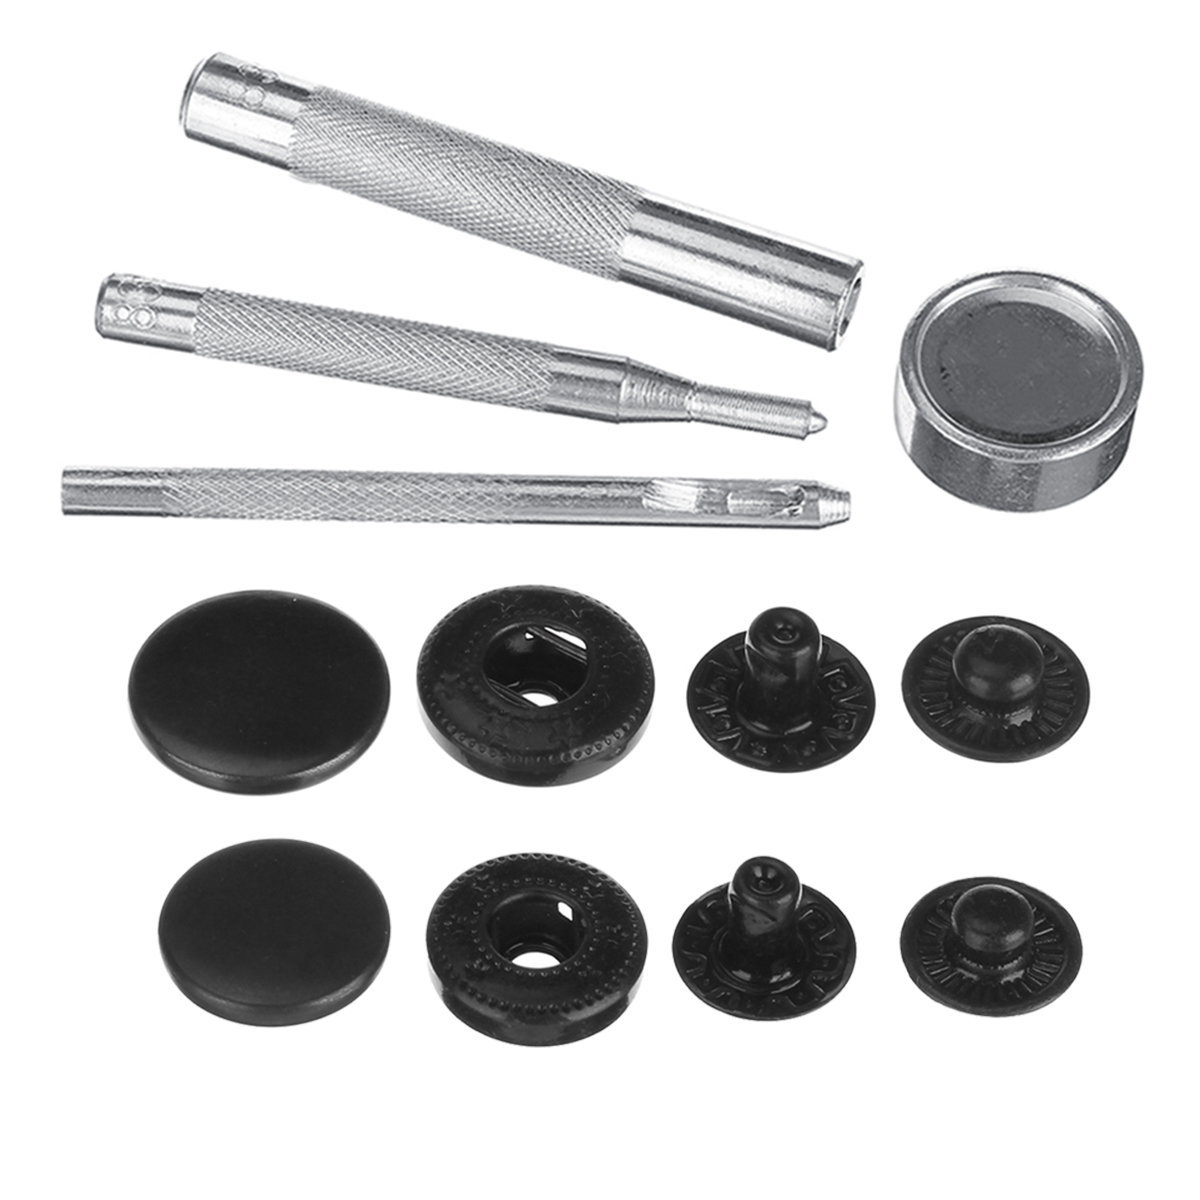 

8pcs/Set 15mm or 12.5mm Black Snap Fasteners Popper Press Stud Button With Fixing Kit